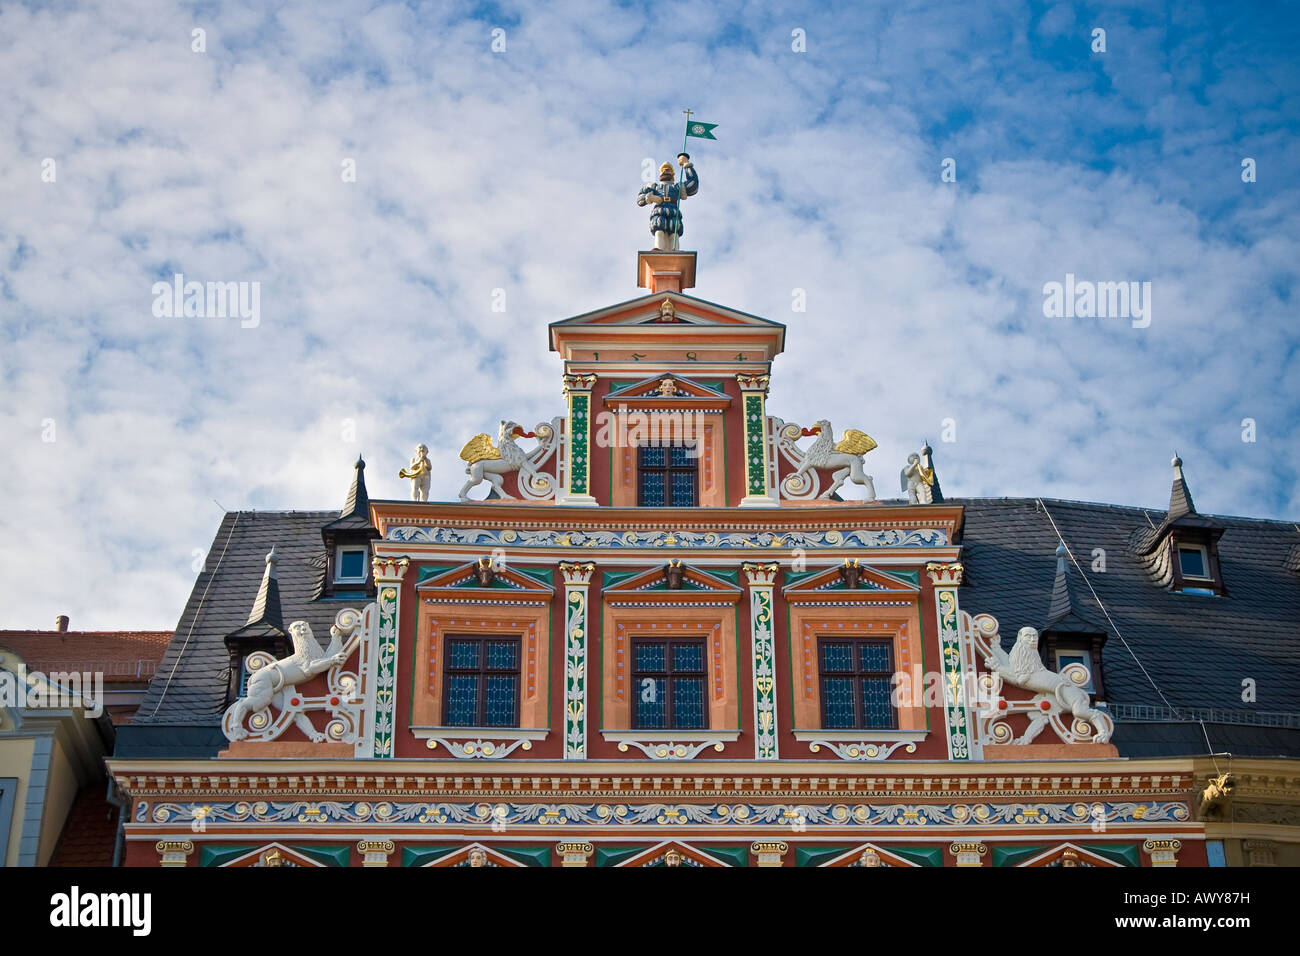 Façade detail of a 16th century 1584 restored building with elaborate gilded mouldings Erfurt Thuringia Eastern Germany Stock Photo